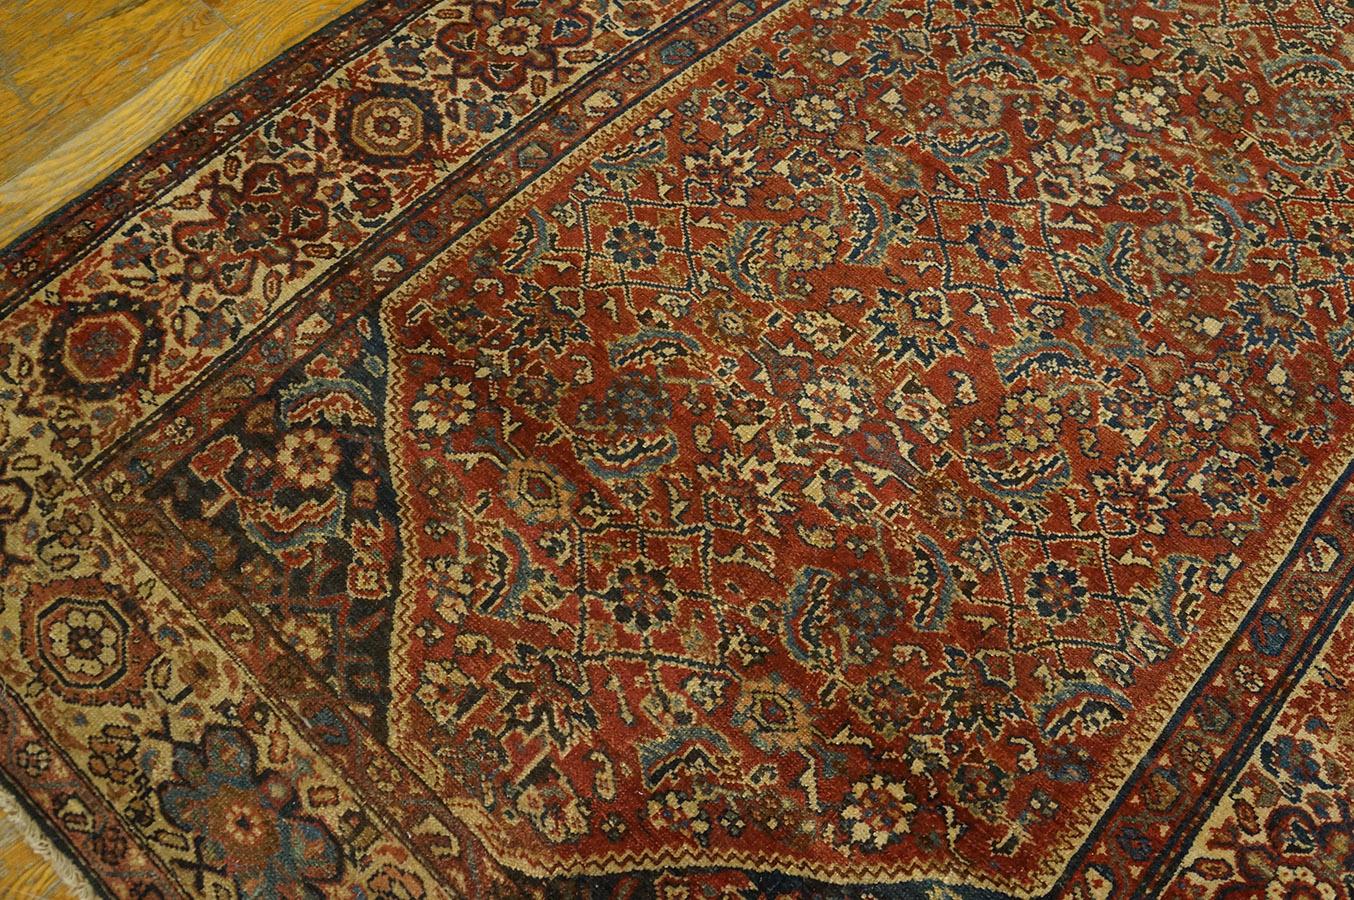 Early 20th Century Persian Malayer Carpet ( 4'3